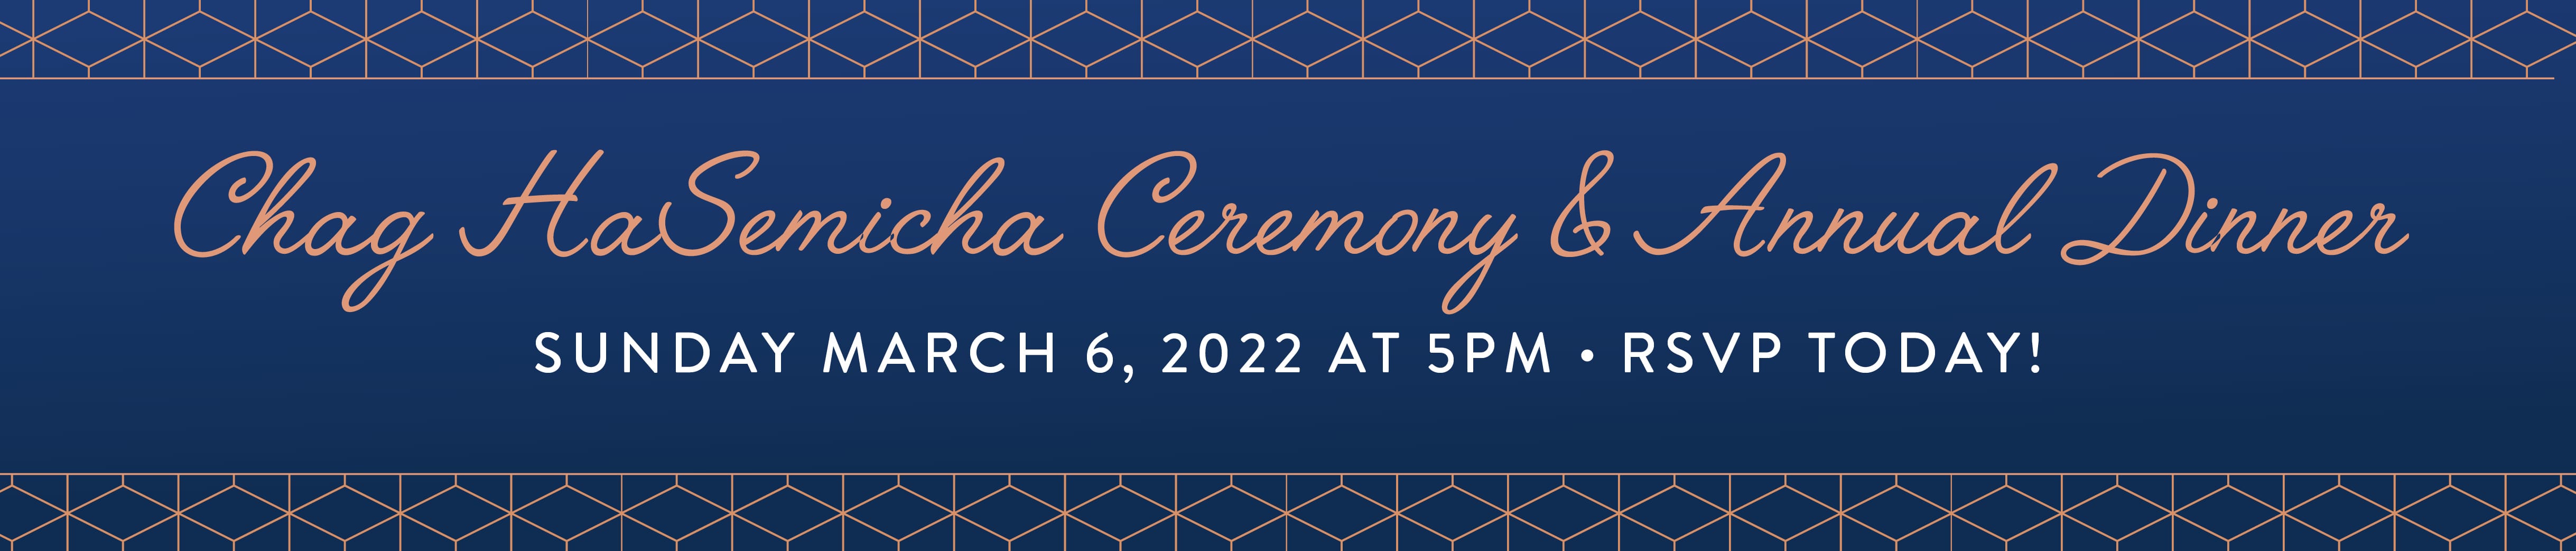 Chag Hasmicha Ceremony & Annual Dinner Sunday March 6, 2022 at 5pm - RSVP Today!